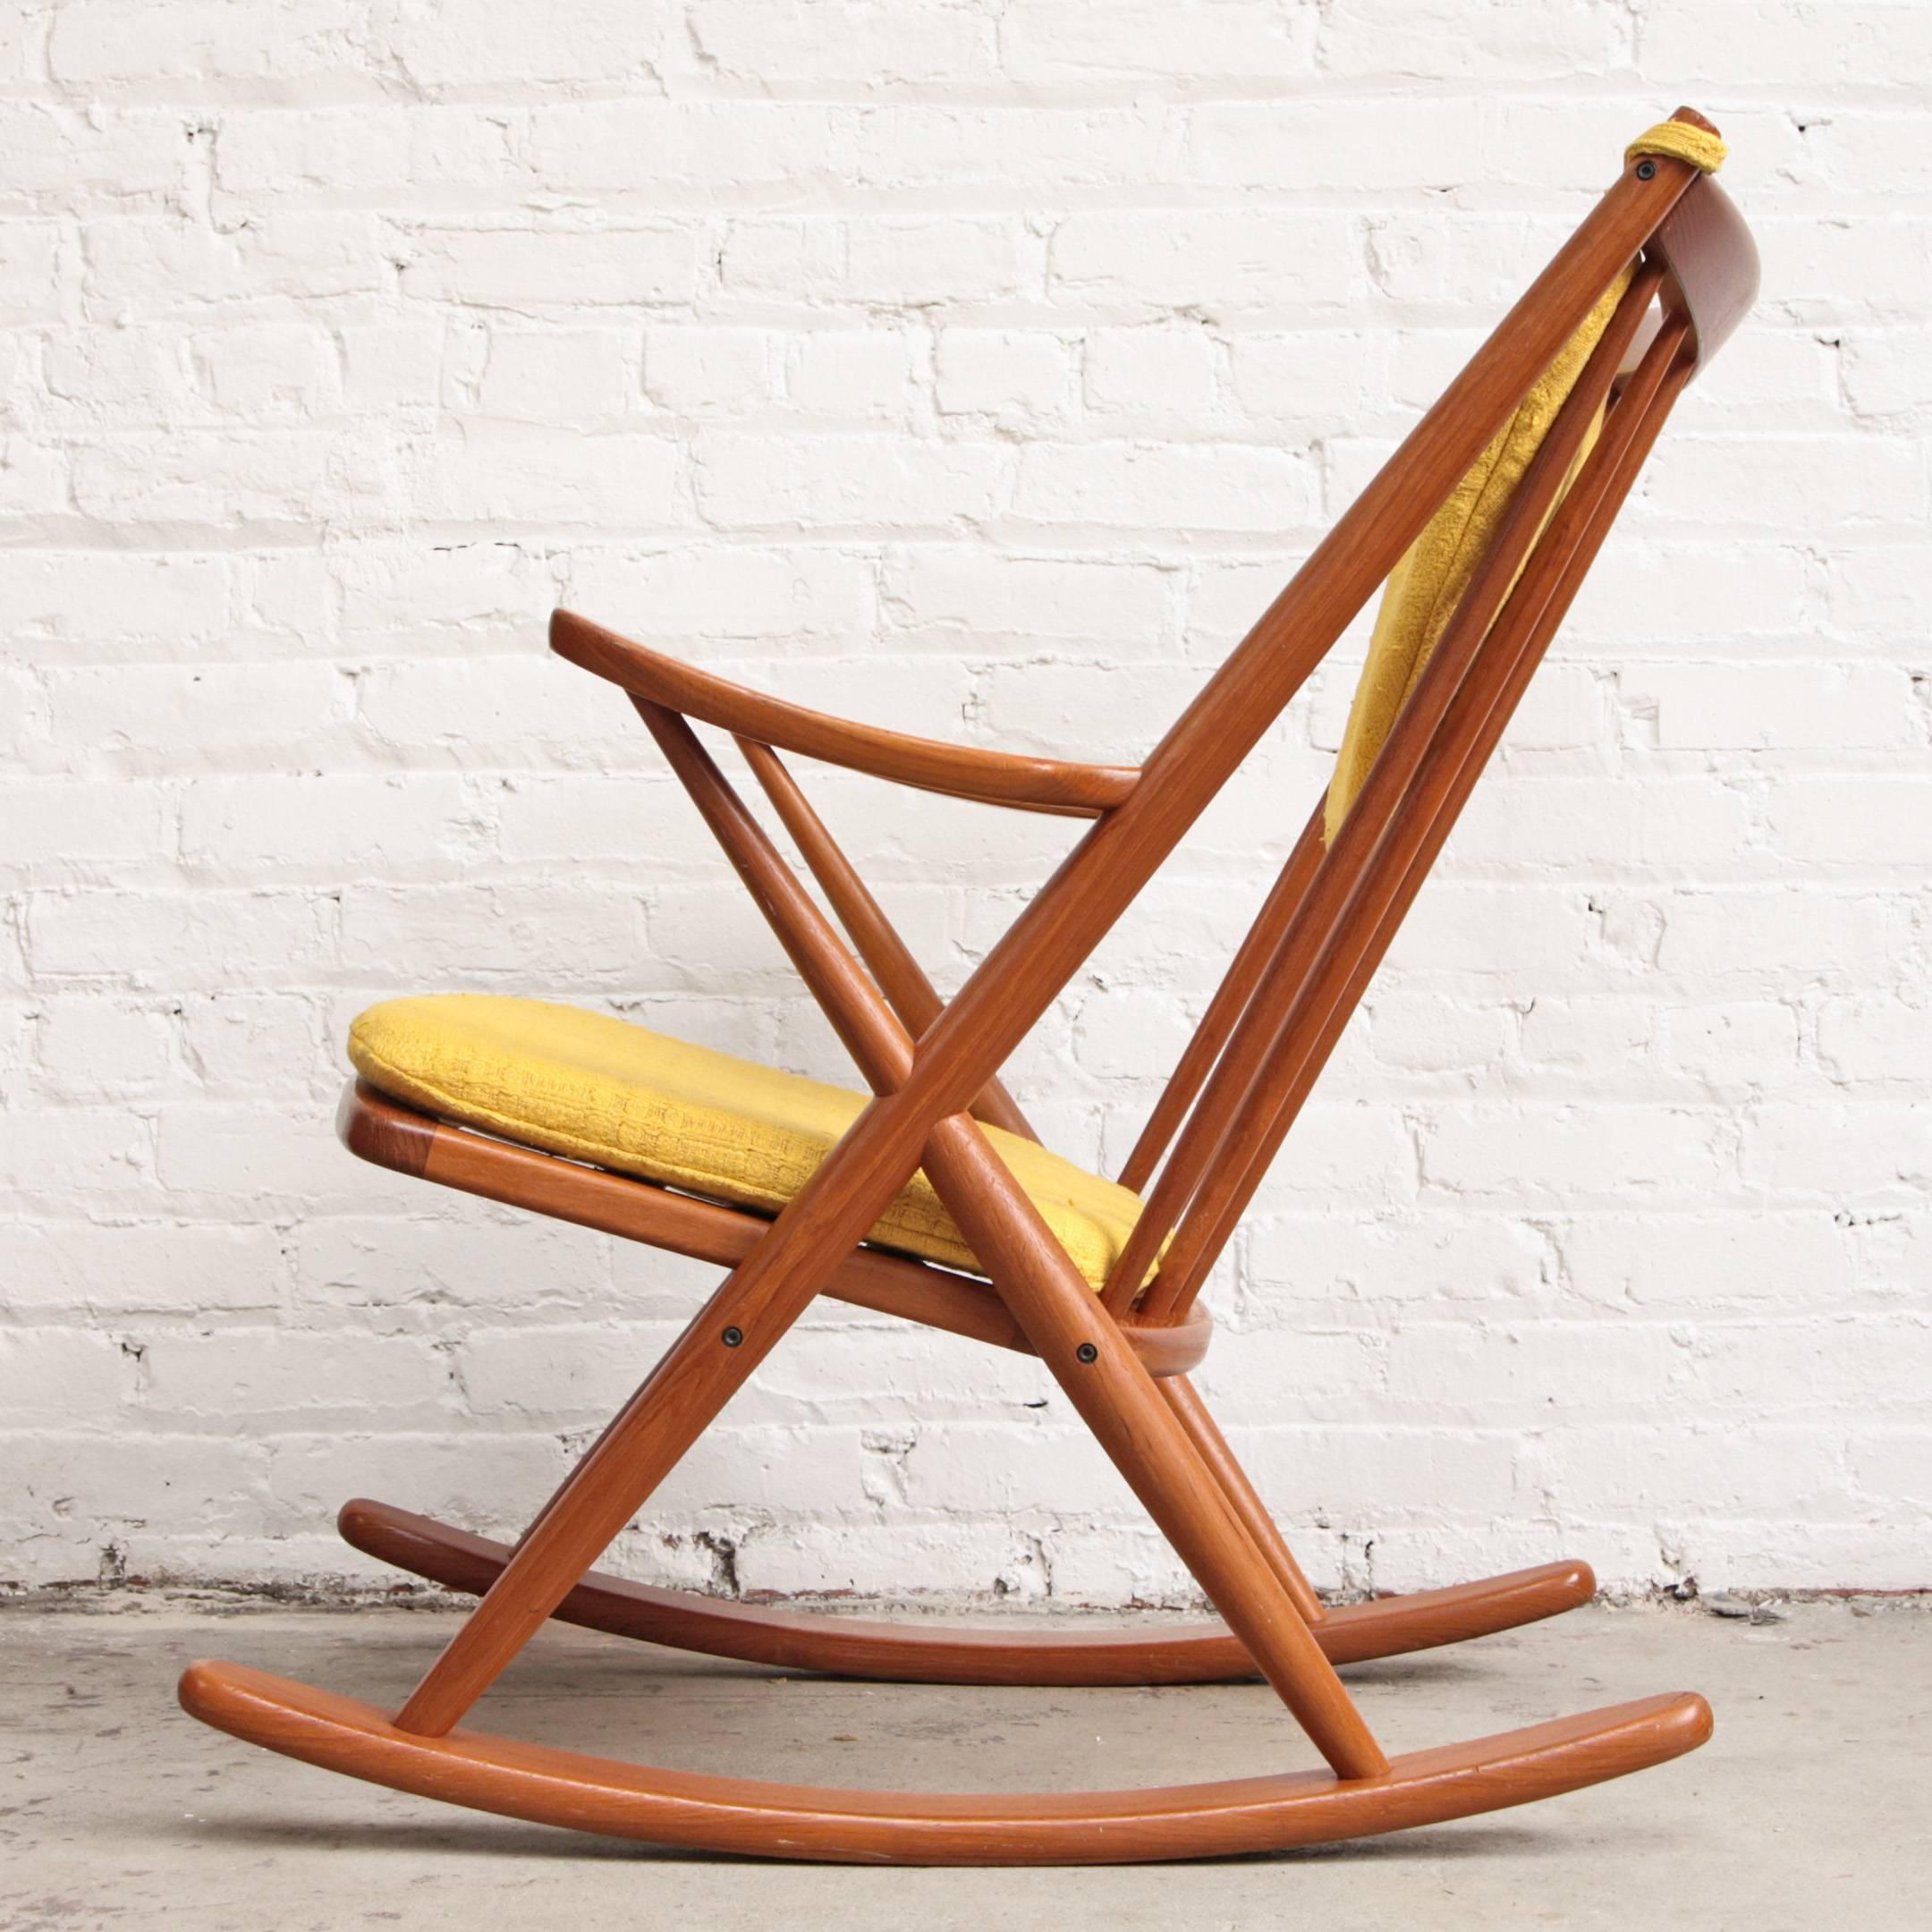 Solid teak rocking chair designed by Frank Reenskaug for Bramin Mobler in 1958, made in Denmark. Newly upholstered yellow cushions.
 